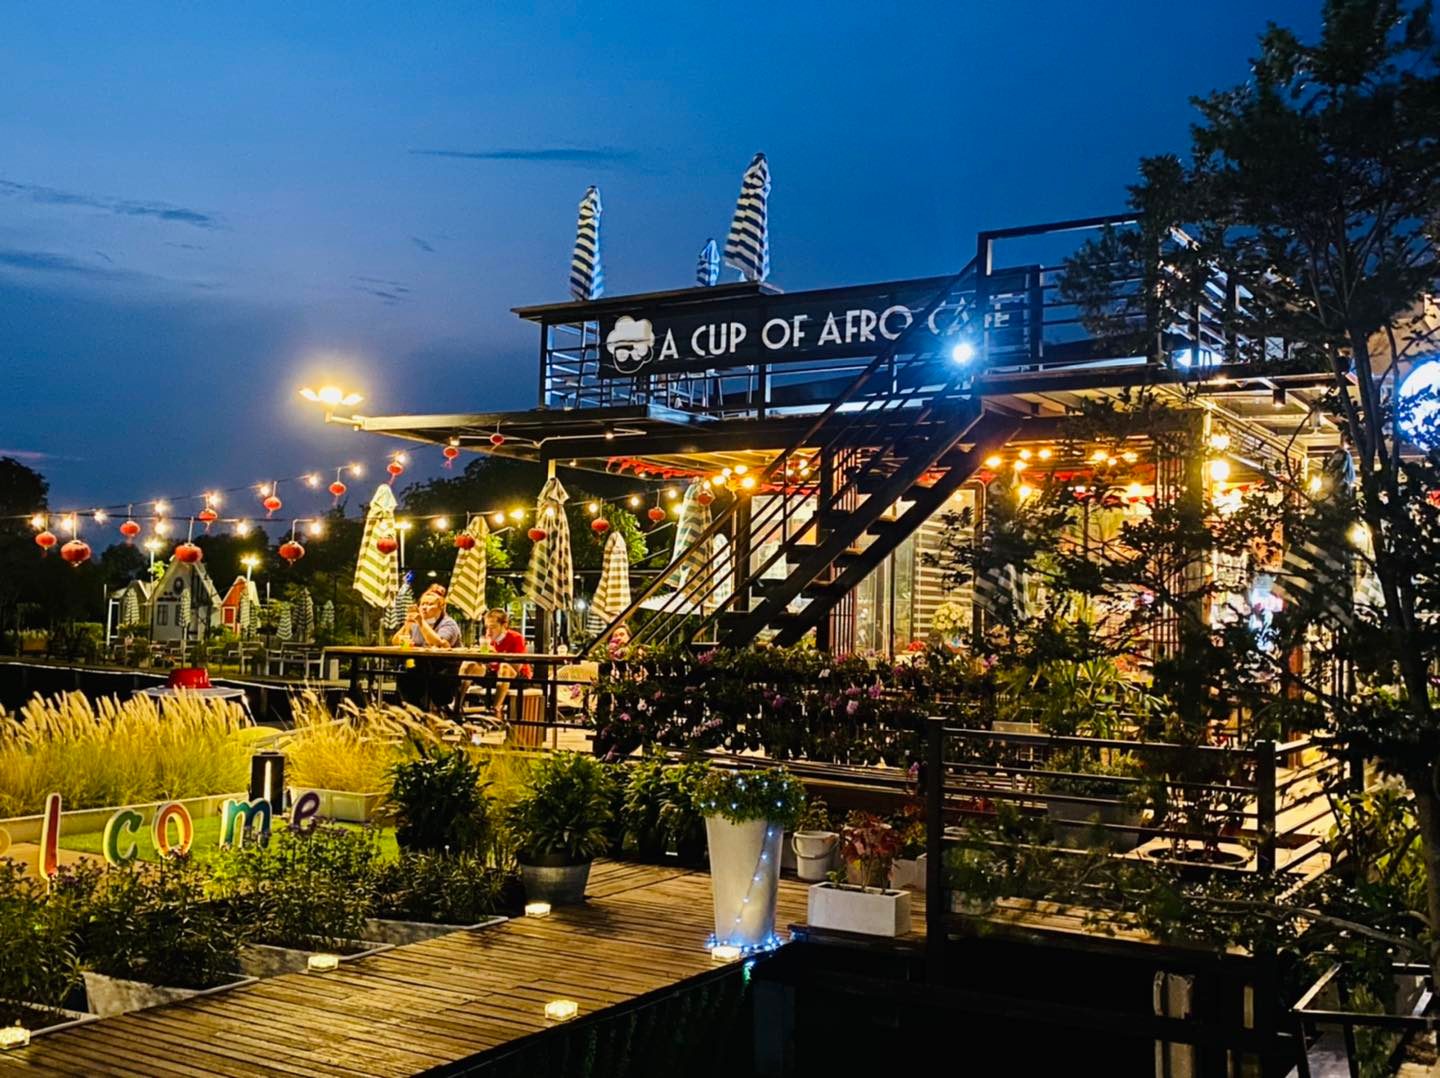 A Cup of Afro Cafe (A Cup of Afro Cafe) : สมุทรสาคร (Samut Sakhon)